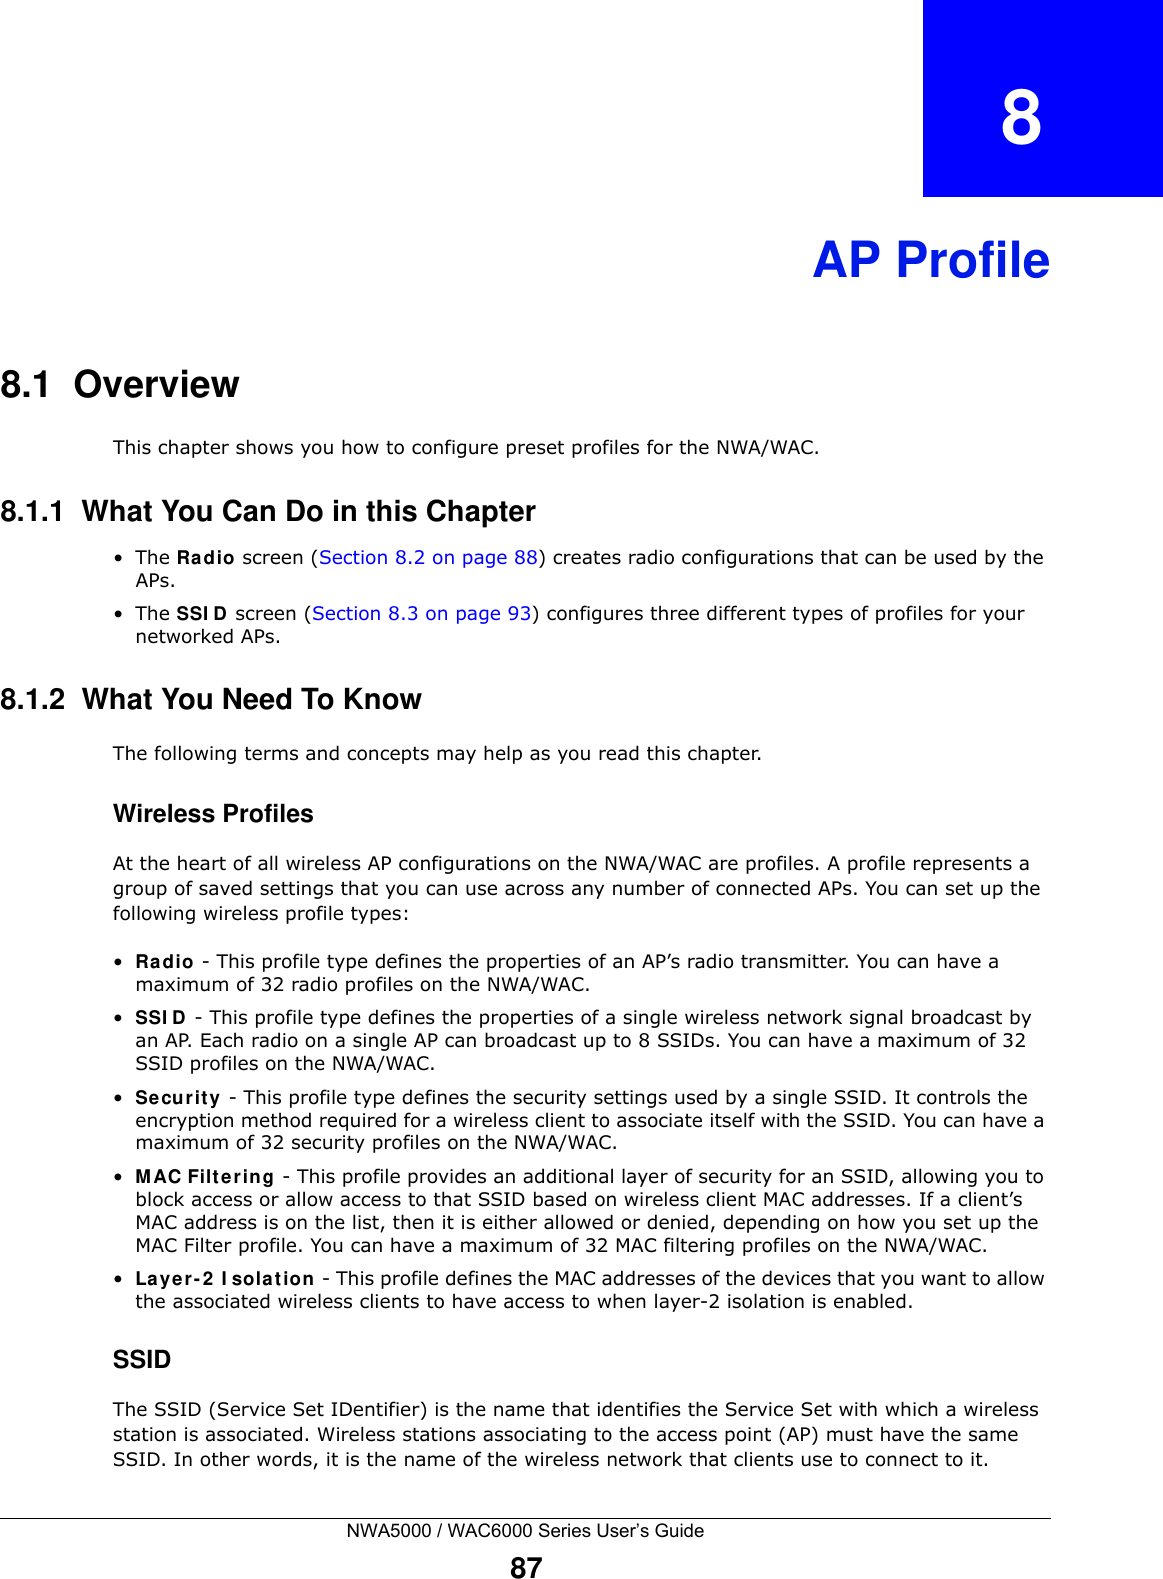 NWA5000 / WAC6000 Series User’s Guide87CHAPTER   8AP Profile8.1  OverviewThis chapter shows you how to configure preset profiles for the NWA/WAC. 8.1.1  What You Can Do in this Chapter•The Ra dio screen (Section 8.2 on page 88) creates radio configurations that can be used by the APs.•The SSI D  screen (Section 8.3 on page 93) configures three different types of profiles for your networked APs.8.1.2  What You Need To KnowThe following terms and concepts may help as you read this chapter.Wireless ProfilesAt the heart of all wireless AP configurations on the NWA/WAC are profiles. A profile represents a group of saved settings that you can use across any number of connected APs. You can set up the following wireless profile types:•Ra dio - This profile type defines the properties of an AP’s radio transmitter. You can have a maximum of 32 radio profiles on the NWA/WAC.•SSI D  - This profile type defines the properties of a single wireless network signal broadcast by an AP. Each radio on a single AP can broadcast up to 8 SSIDs. You can have a maximum of 32 SSID profiles on the NWA/WAC.•Se cu r it y  - This profile type defines the security settings used by a single SSID. It controls the encryption method required for a wireless client to associate itself with the SSID. You can have a maximum of 32 security profiles on the NWA/WAC.•MAC Filt er ing - This profile provides an additional layer of security for an SSID, allowing you to block access or allow access to that SSID based on wireless client MAC addresses. If a client’s MAC address is on the list, then it is either allowed or denied, depending on how you set up the MAC Filter profile. You can have a maximum of 32 MAC filtering profiles on the NWA/WAC.•La yer - 2  I sola tion - This profile defines the MAC addresses of the devices that you want to allow the associated wireless clients to have access to when layer-2 isolation is enabled. SSIDThe SSID (Service Set IDentifier) is the name that identifies the Service Set with which a wireless station is associated. Wireless stations associating to the access point (AP) must have the same SSID. In other words, it is the name of the wireless network that clients use to connect to it.